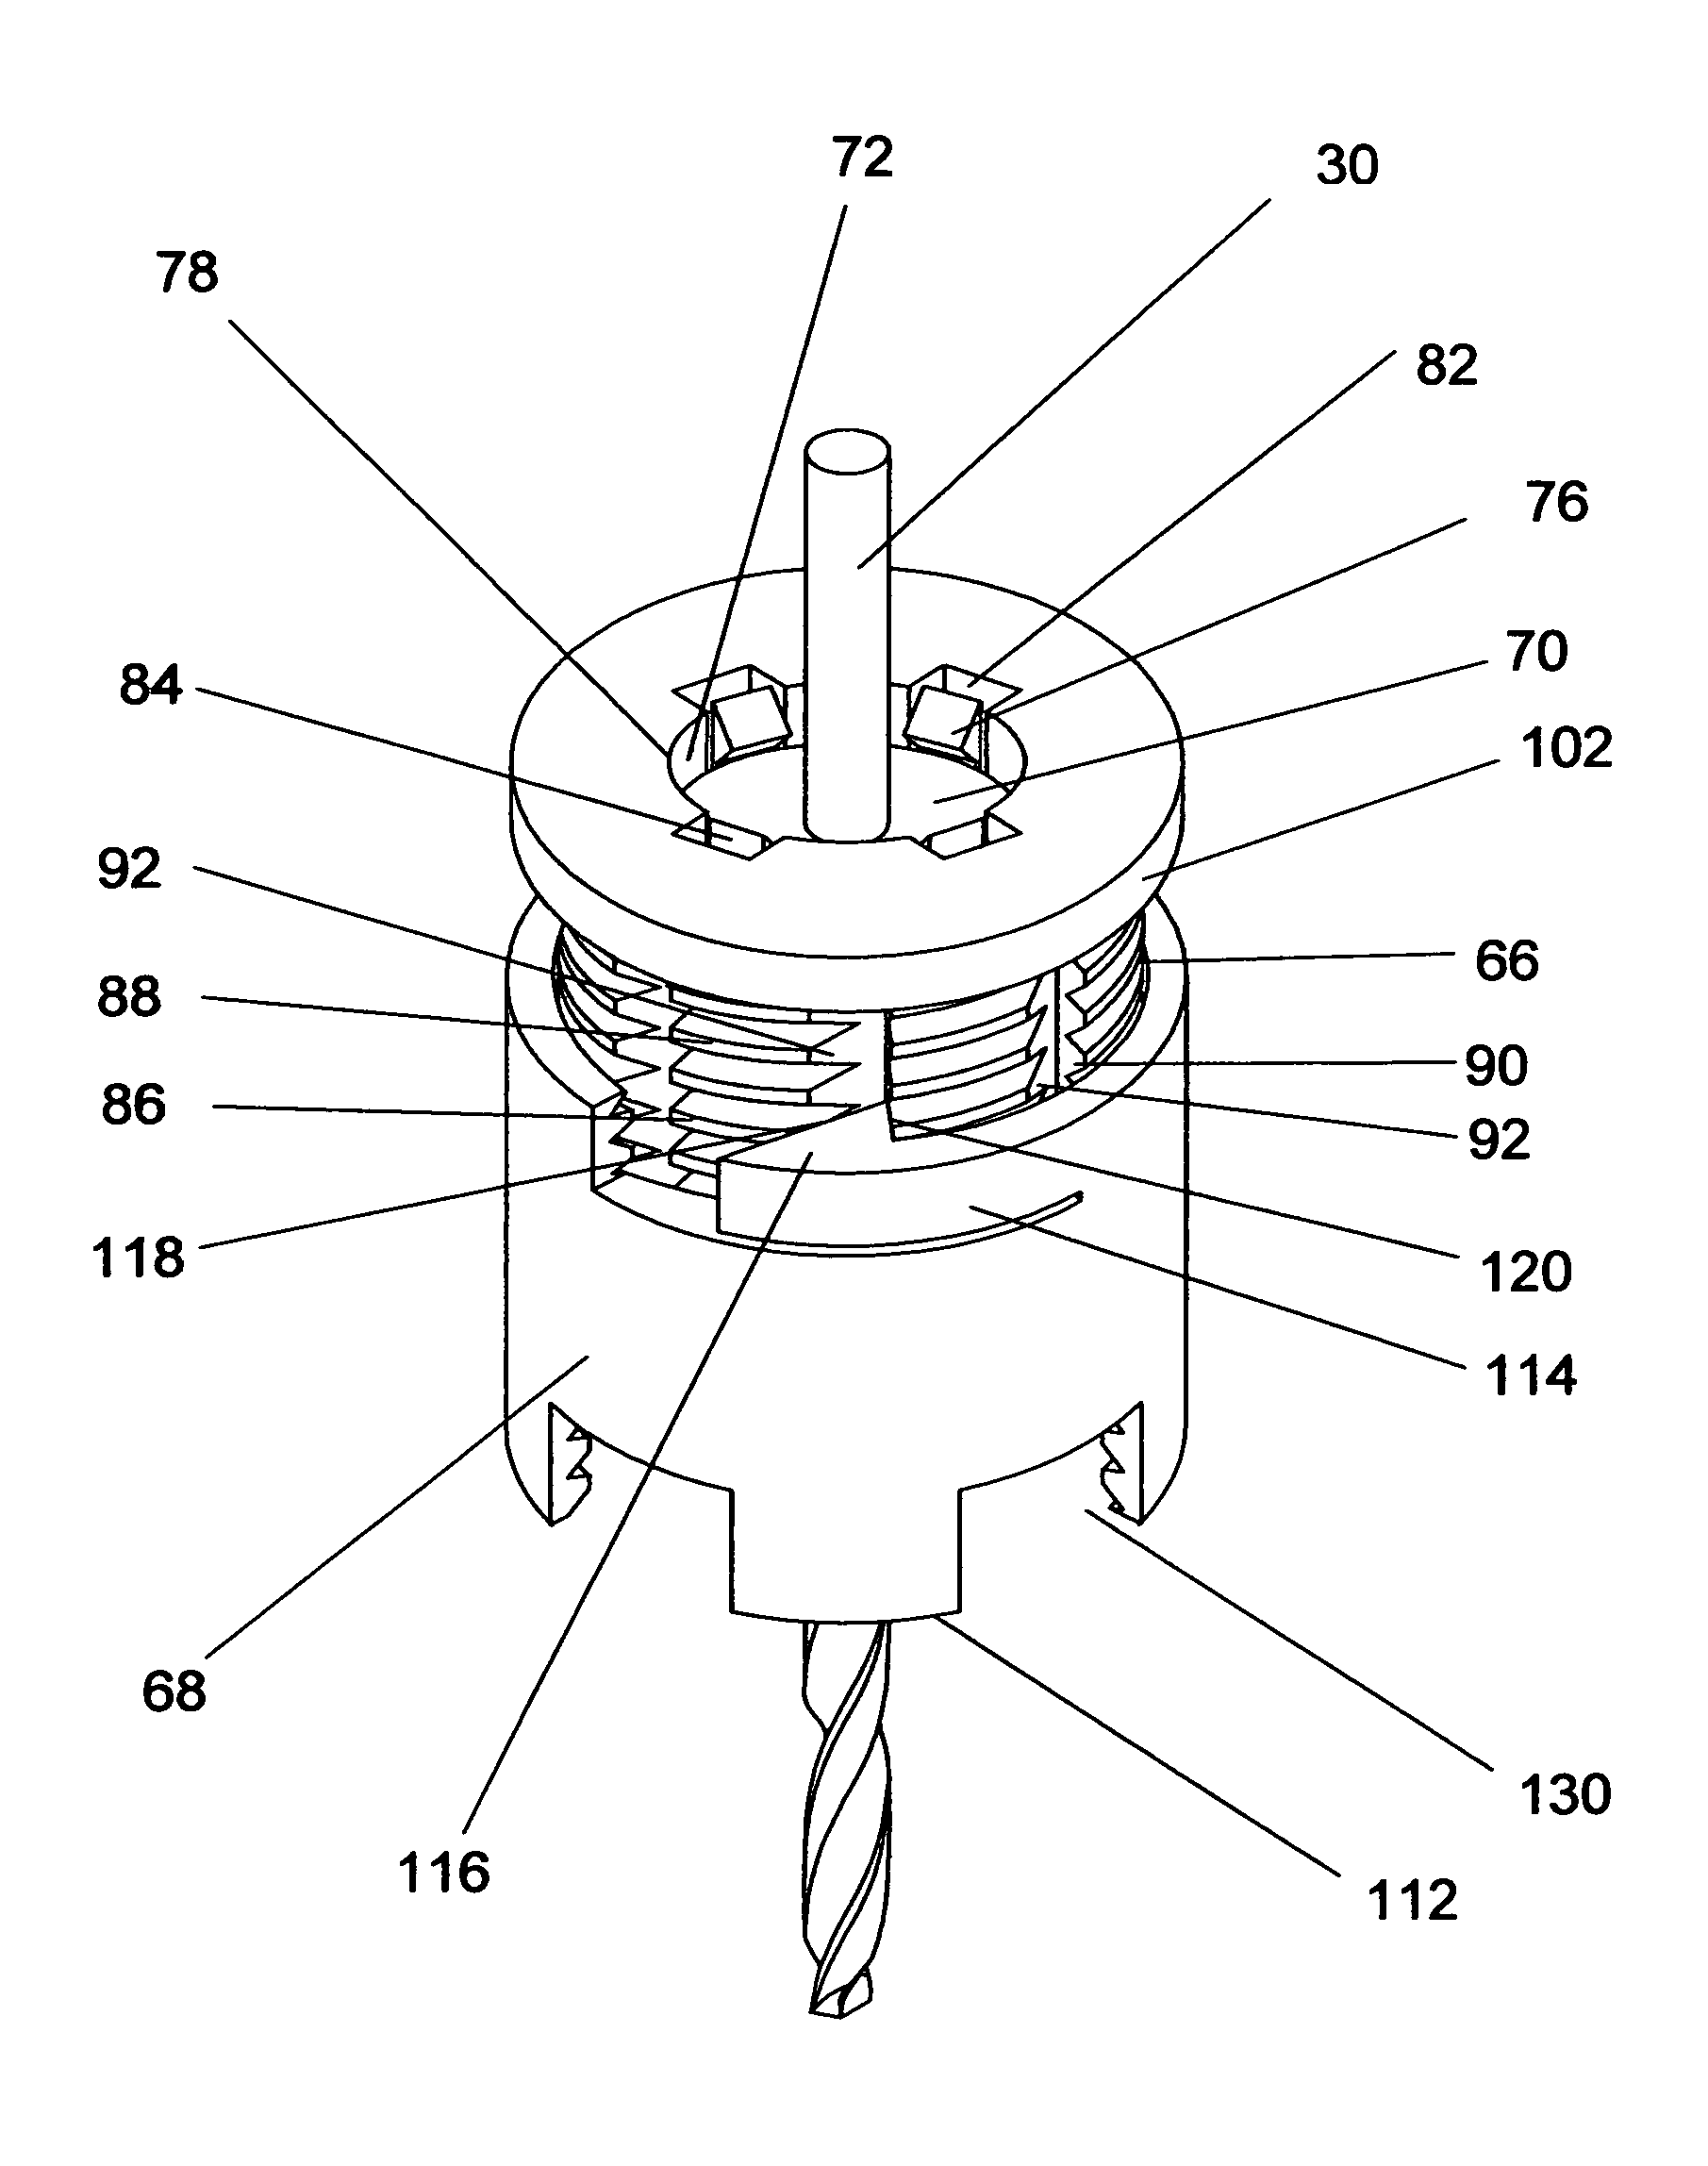 Depth limiting device for a boring tool